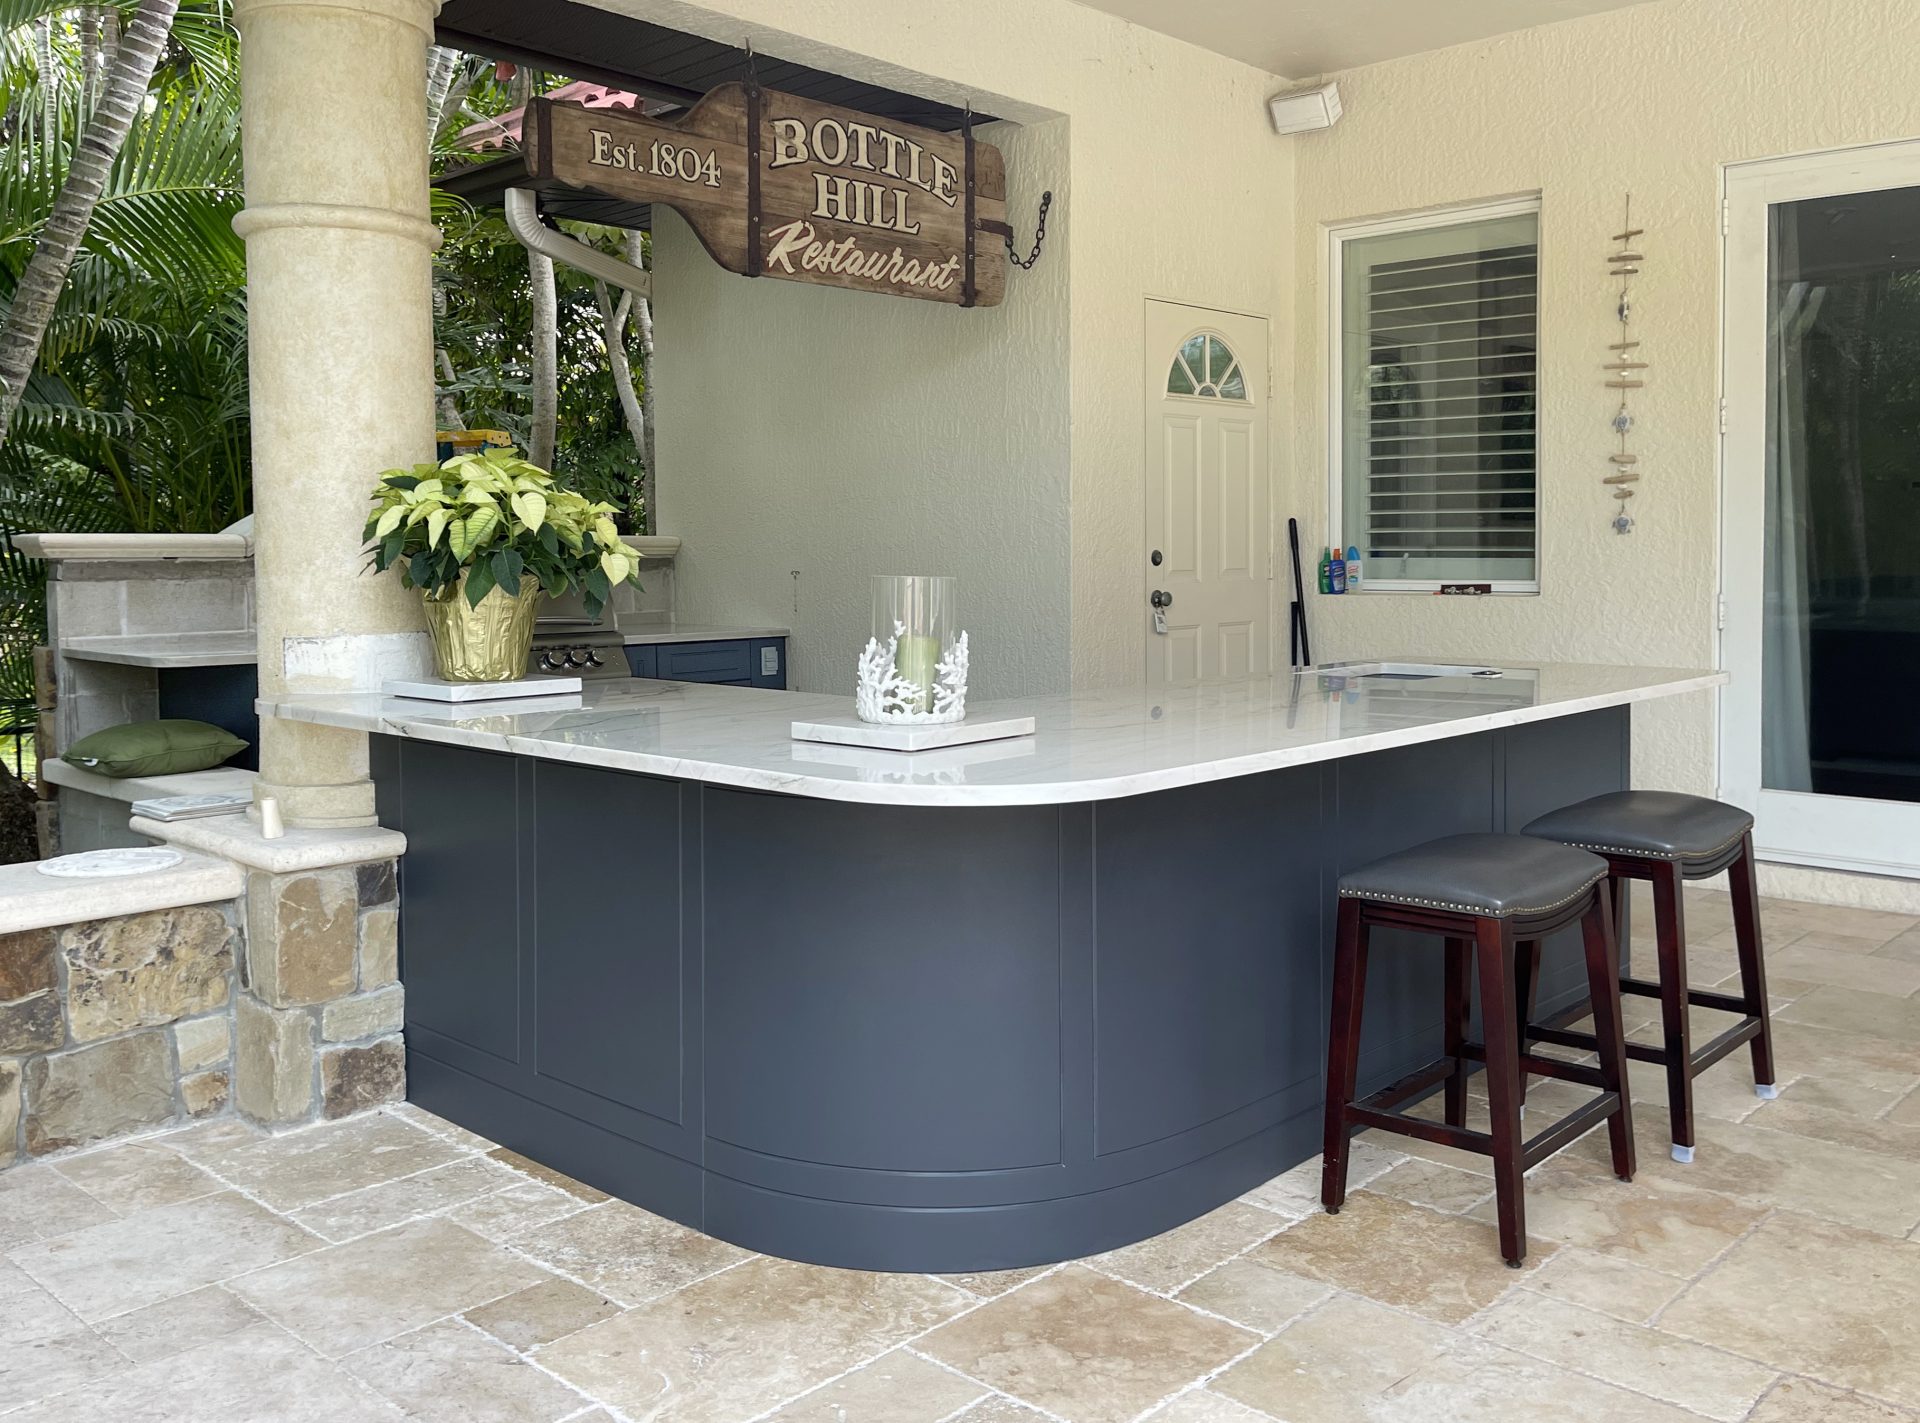 OUTDOOR KITCHEN 29. Custom outdoor kitchen in Casey Key, FL. Kitchen features charcoal grey, sport style cabinets. Appliances include Blaze grill and stainless bar pulls.